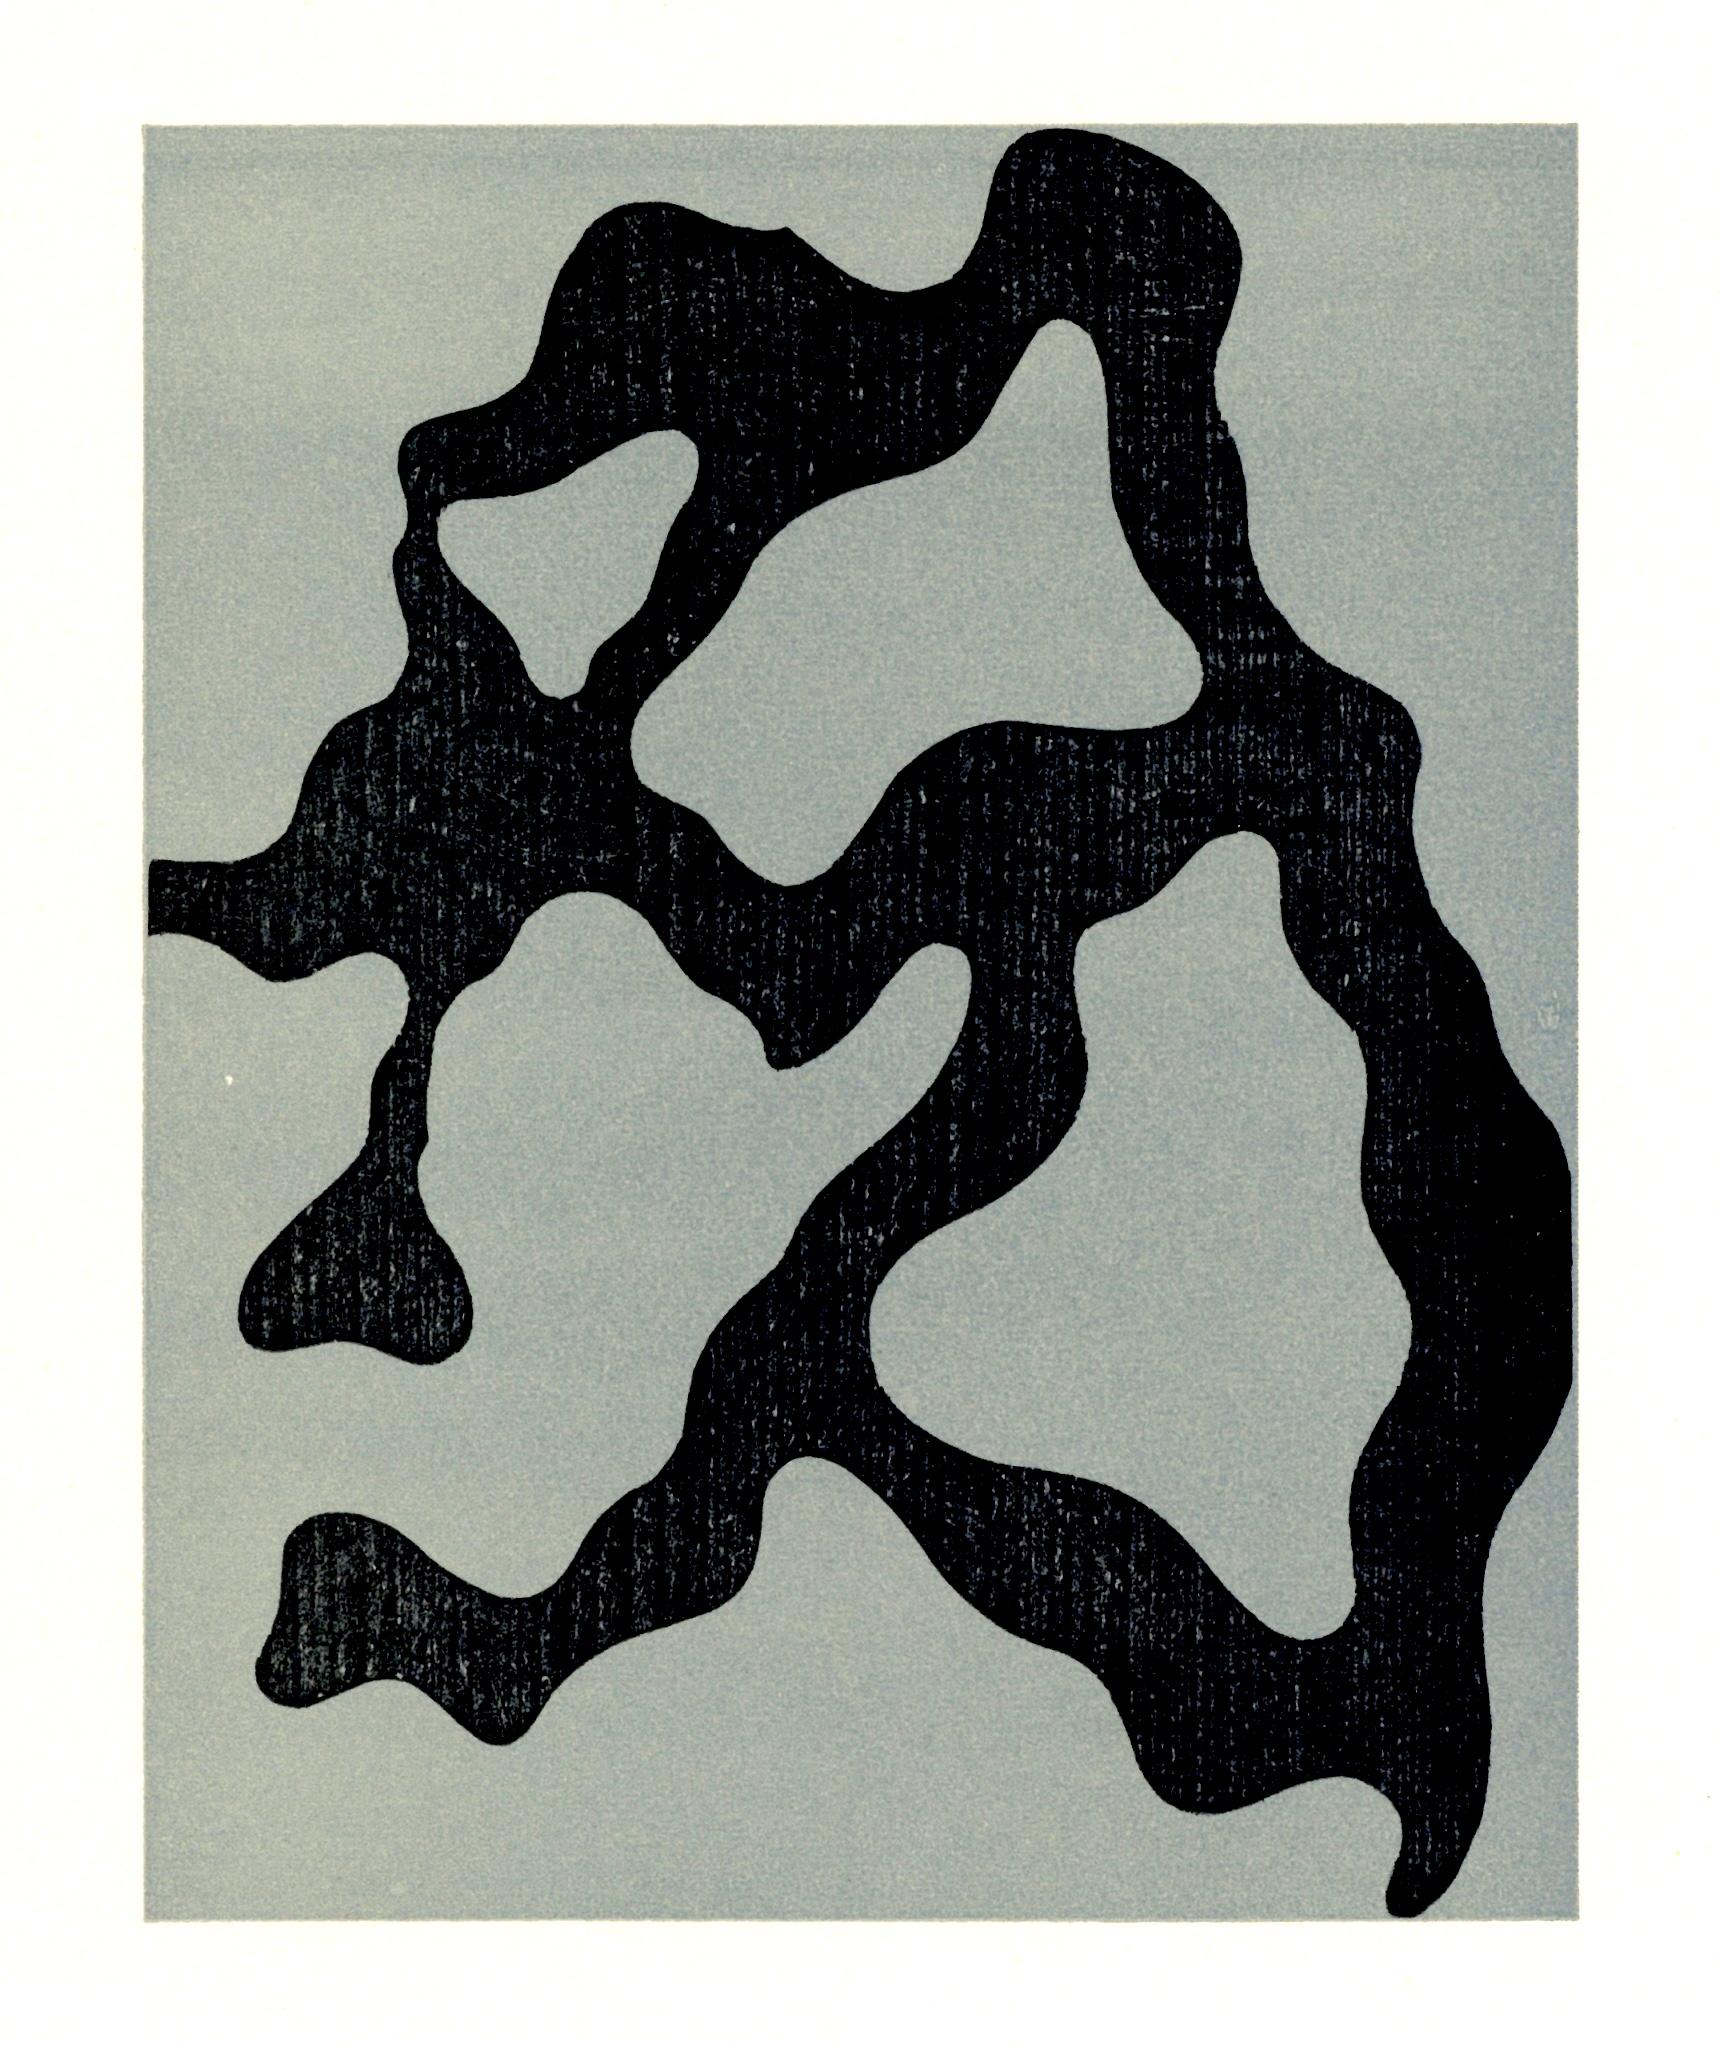 Woodcut on wove paper. Inscription: Unsigned and unnumbered, as issued. Good Condition; never framed or matted. Notes: From the volume, XXe Siècle, n°4, 1954. Published by Editions XXe Siècle, Paris; Printed by Mourlot, Paris, 1954.

JEAN ARP